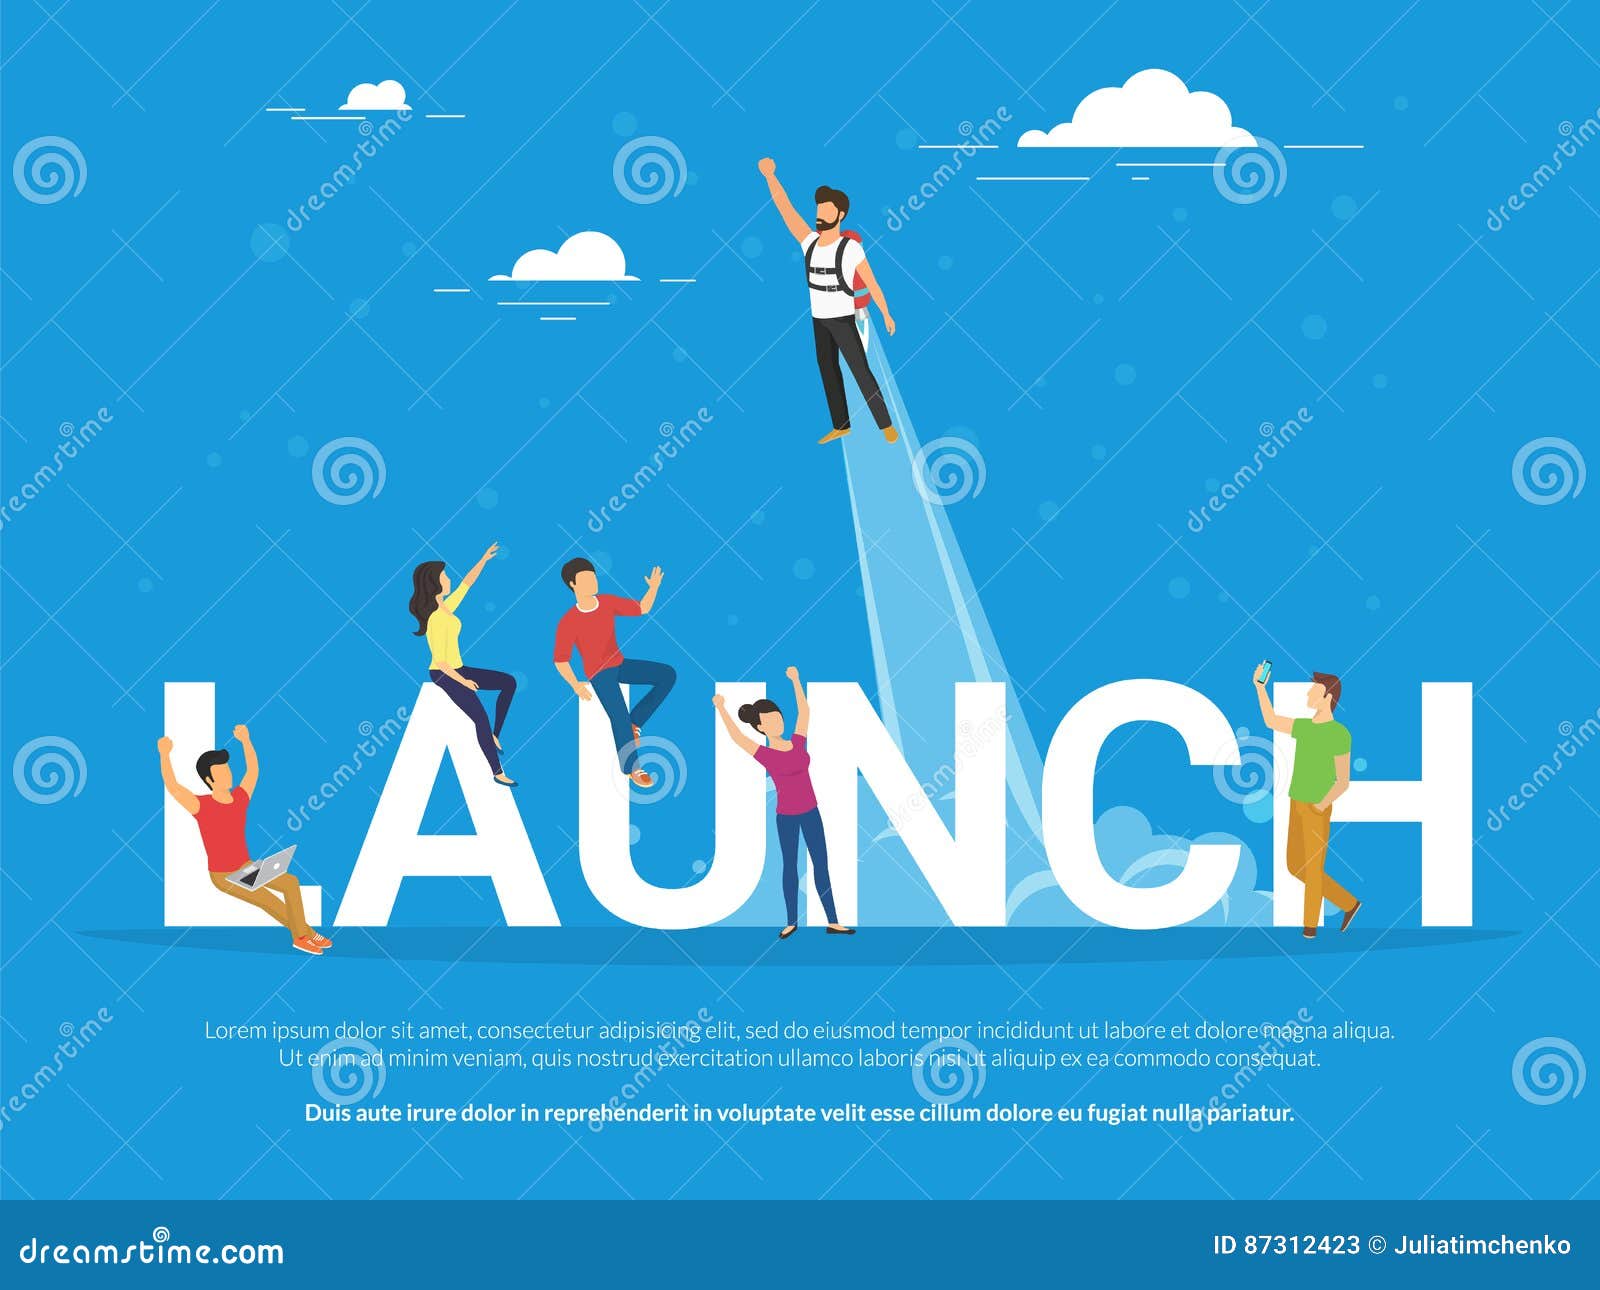 startup launch concept  of business people working together as team